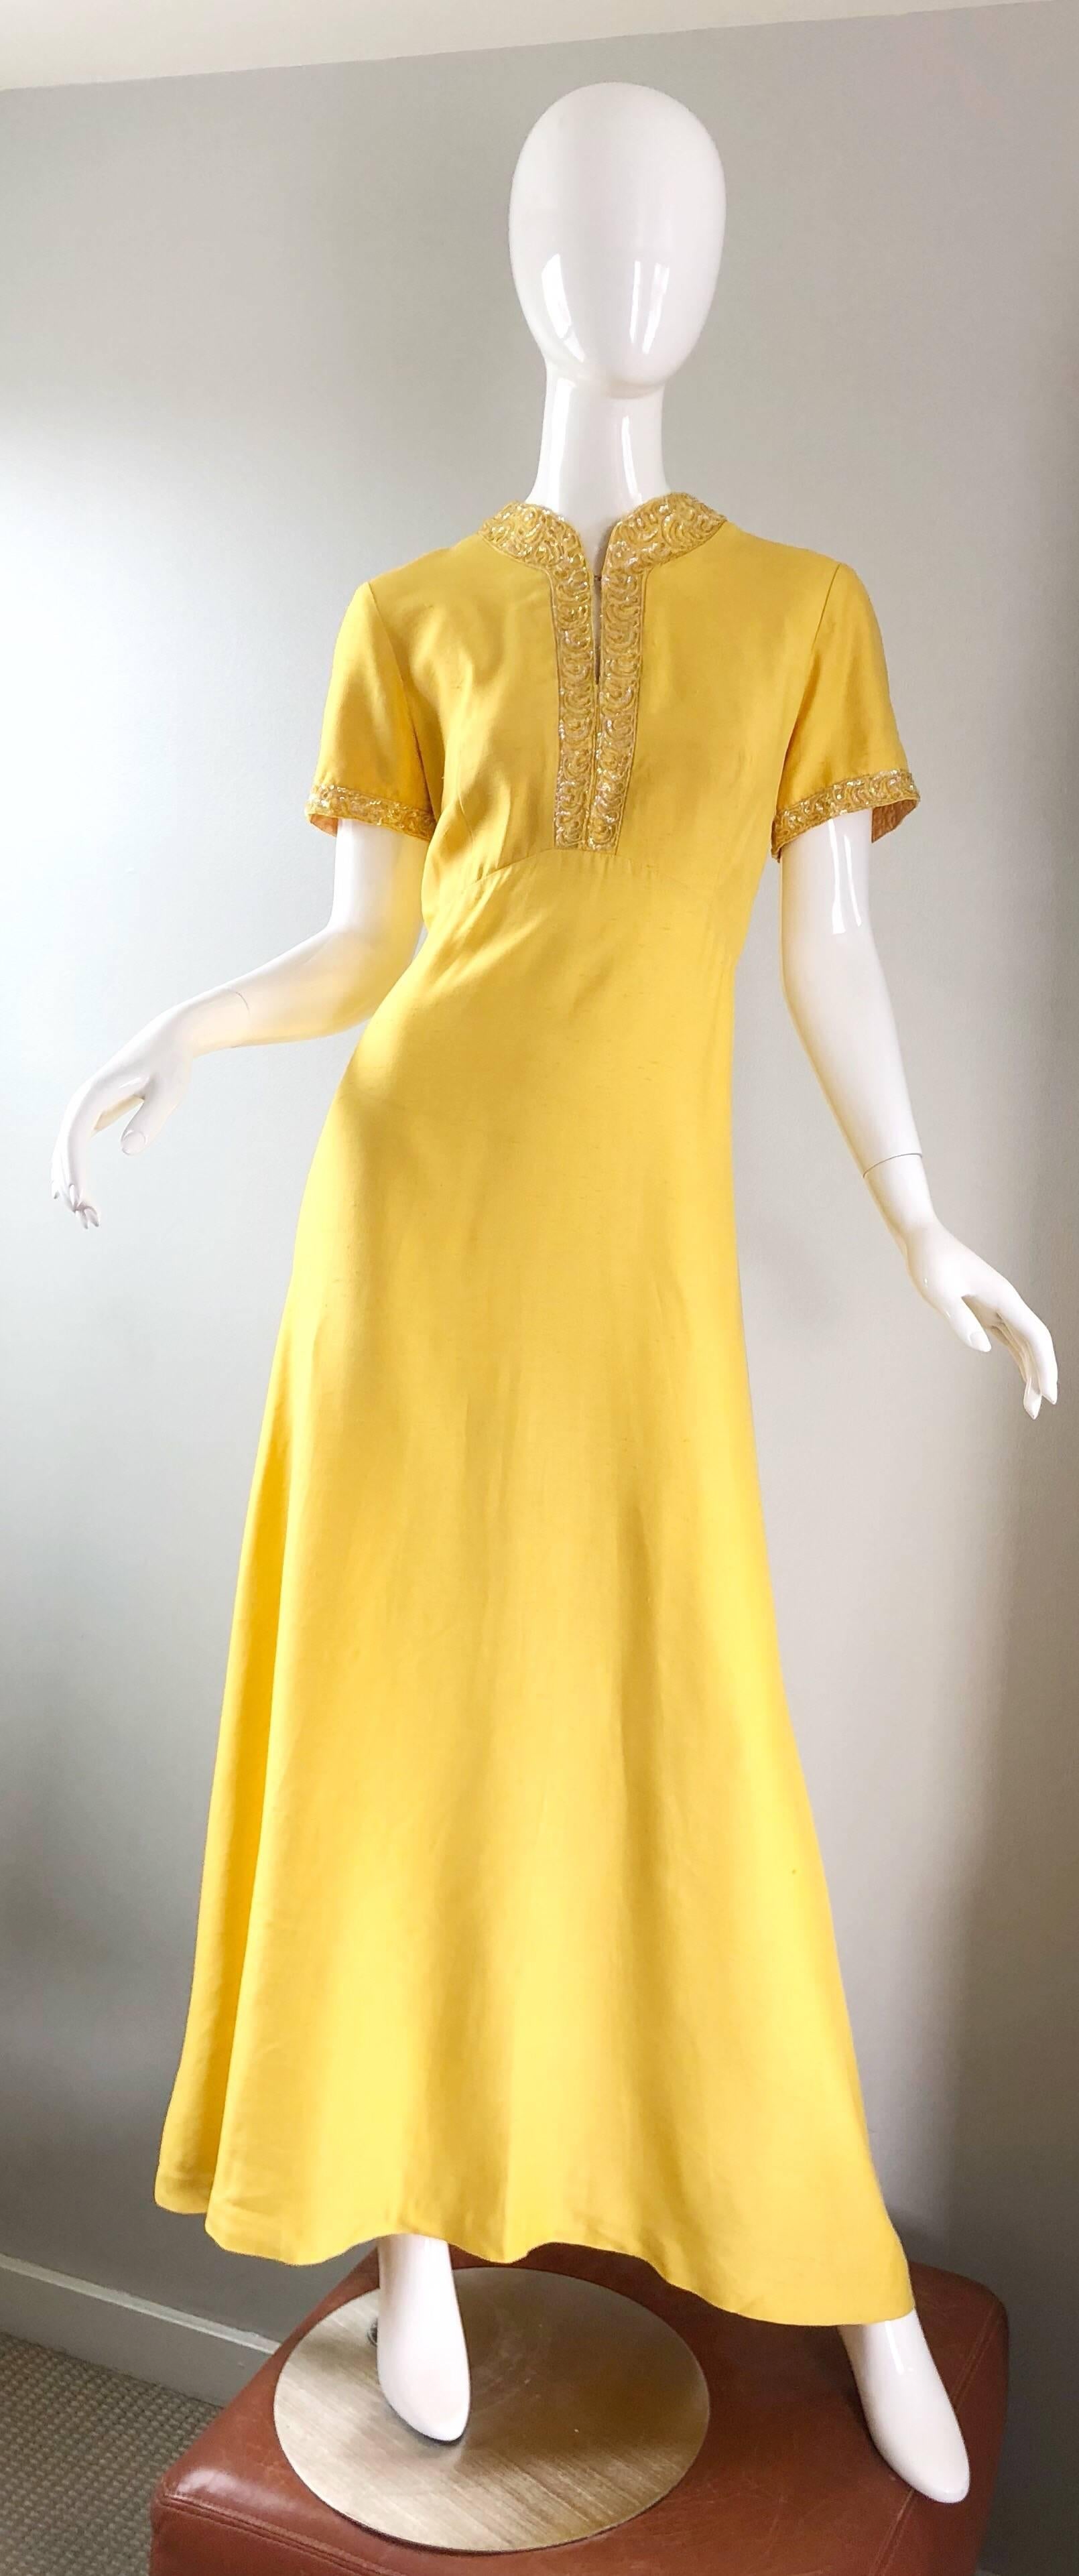 Beautiful vintage 70s does 40s canary yellow silk shantung maxi dress / gown! Features a luxurious yellow raw silk shantung. Fitted bodice with a forgiving flattering skirt. Hundreds of hand-sewn iridescent sequins adorn the neckline and each sleeve